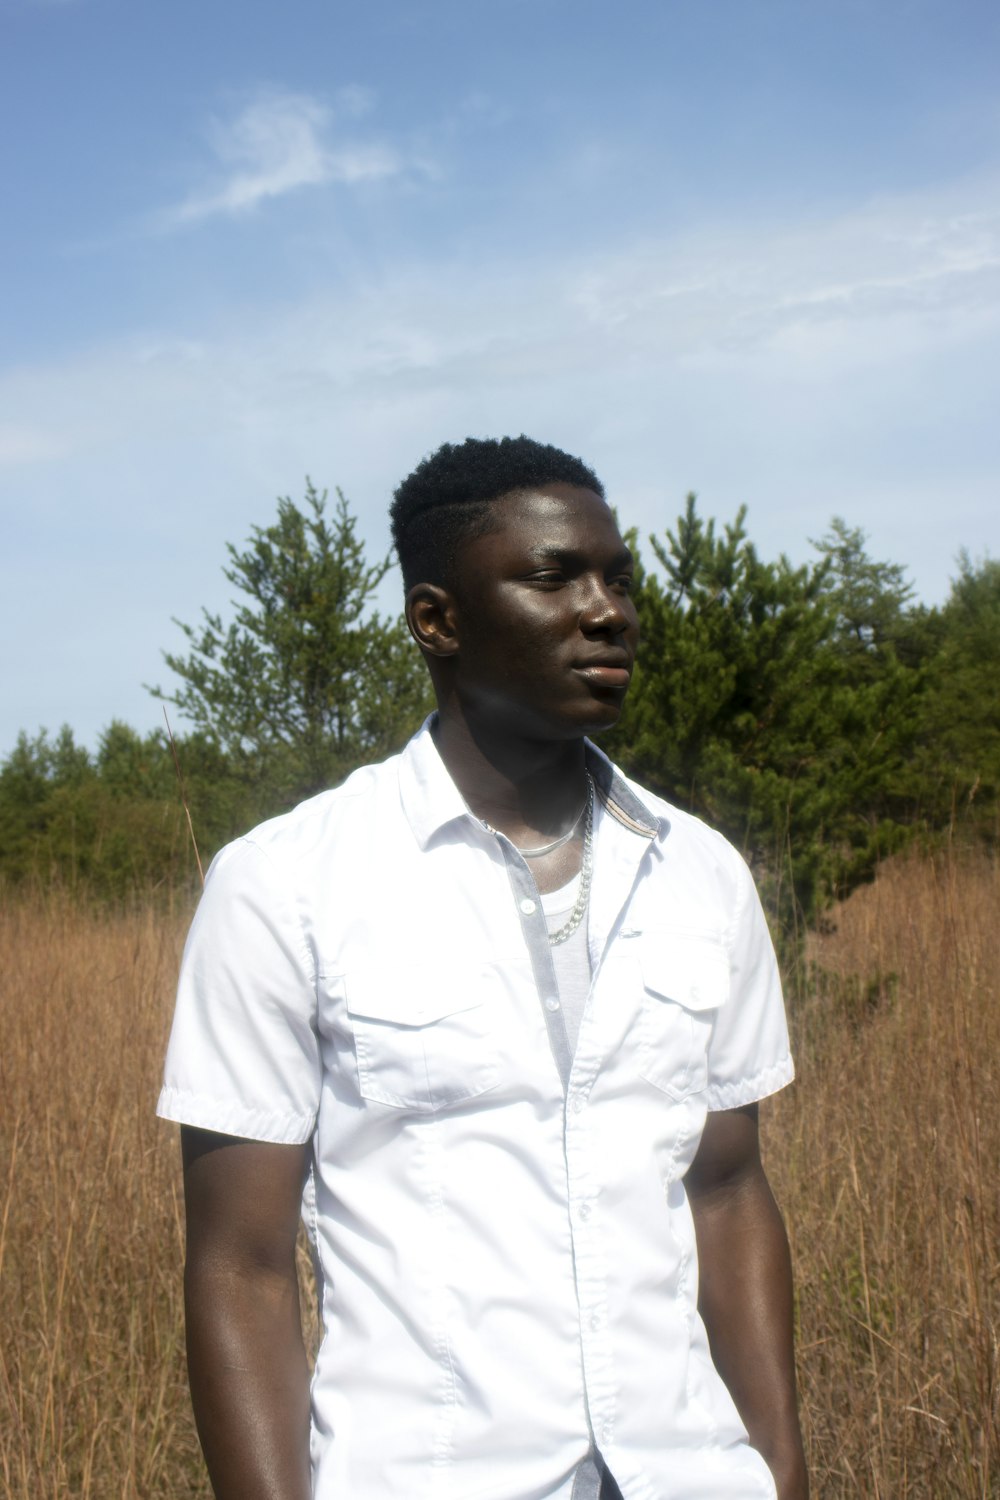 man in white button up shirt standing on brown grass field during daytime